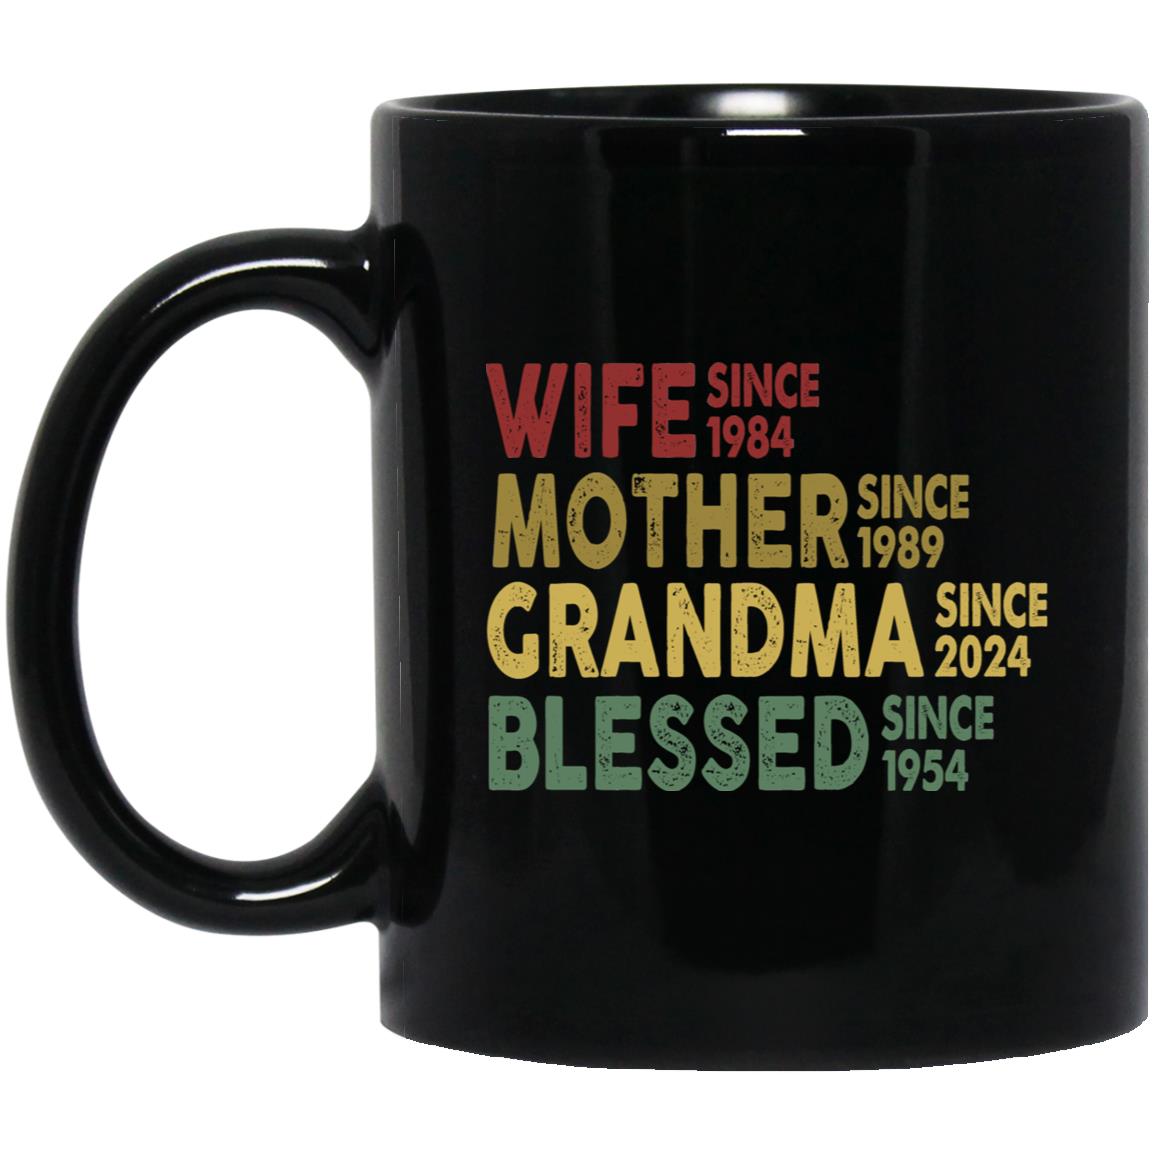 Personalized Grandma Gift Mug For Mothers Day